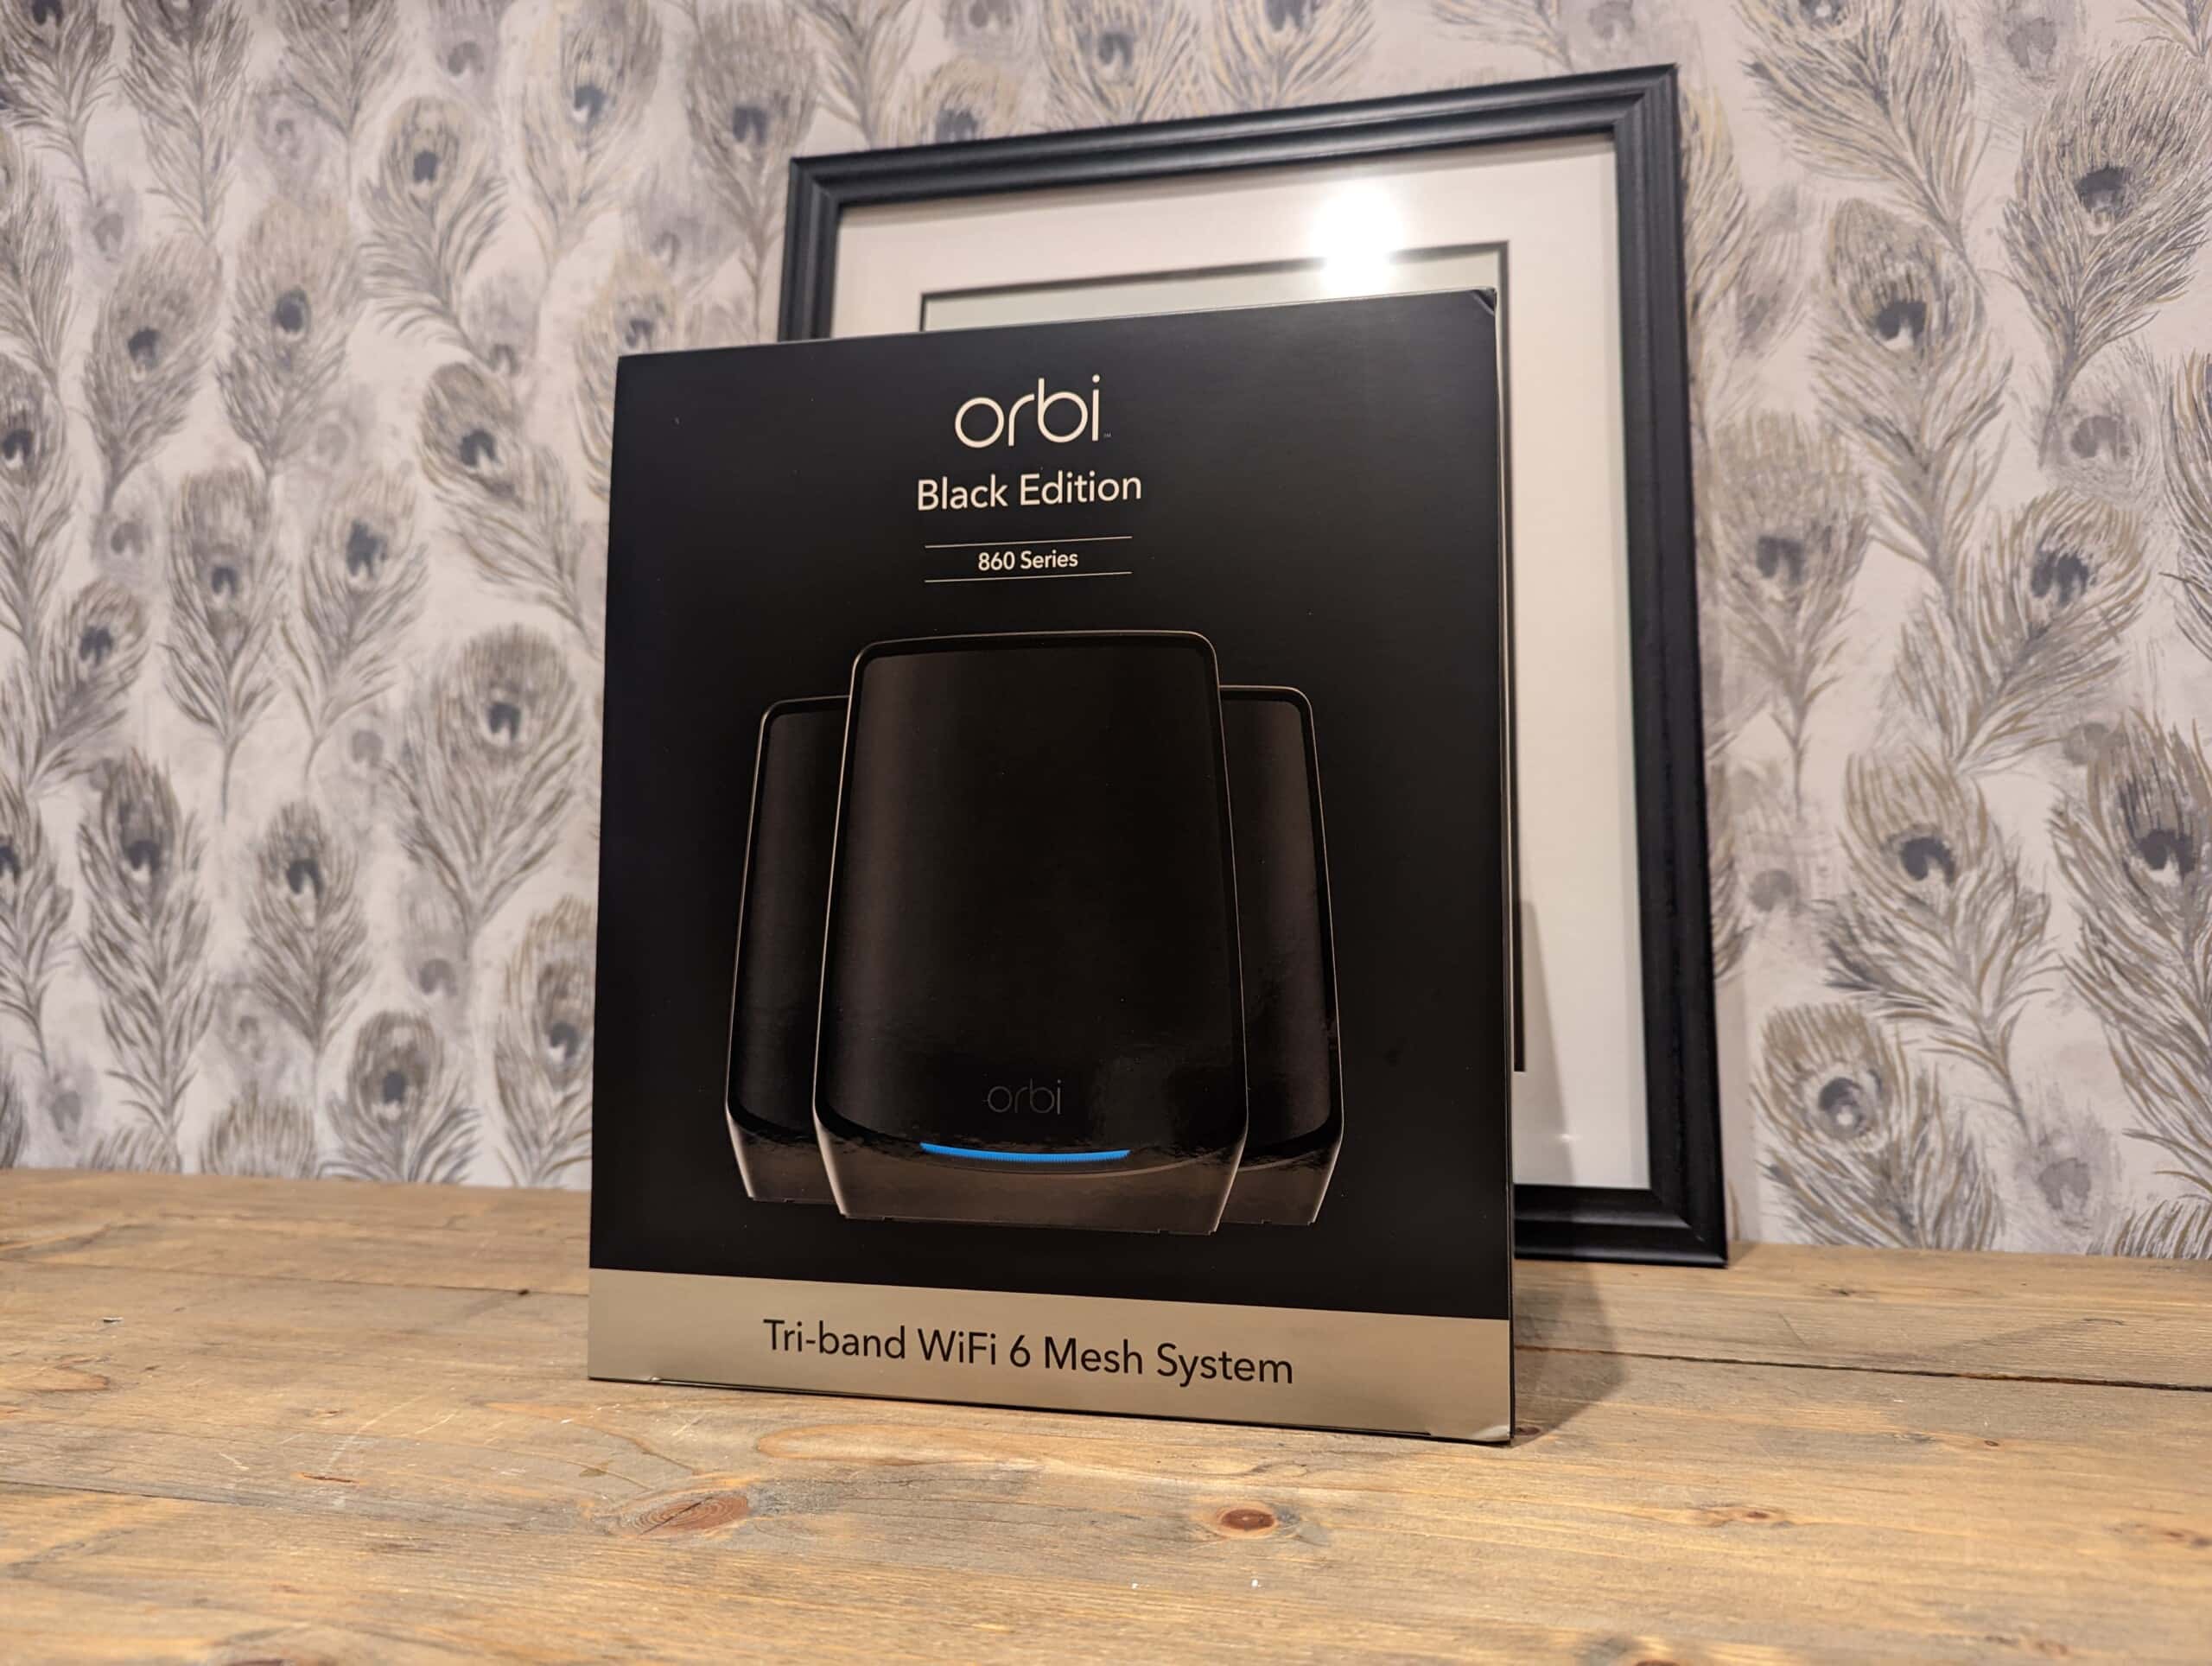 Netgear Orbi 860 WiFi 6 Mesh System Review: RBK863S with RBR860S & RBS860